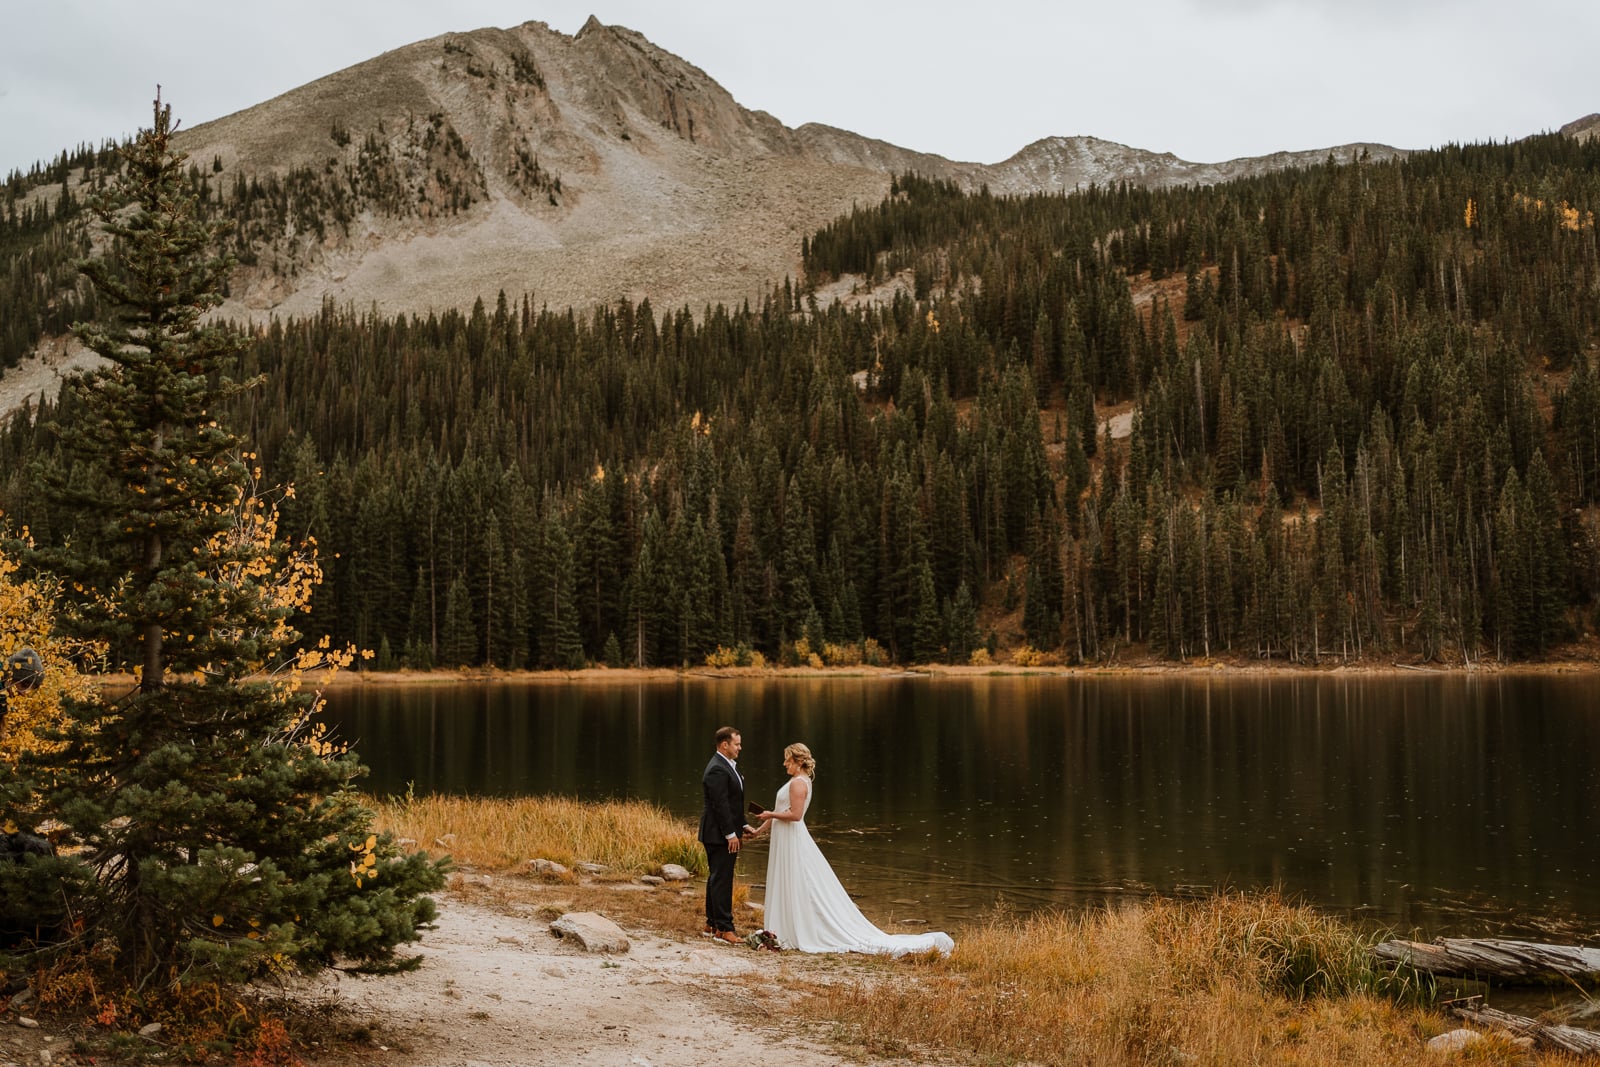 15 Helpful Tips You'll Need When Writing Your Elopement Vows